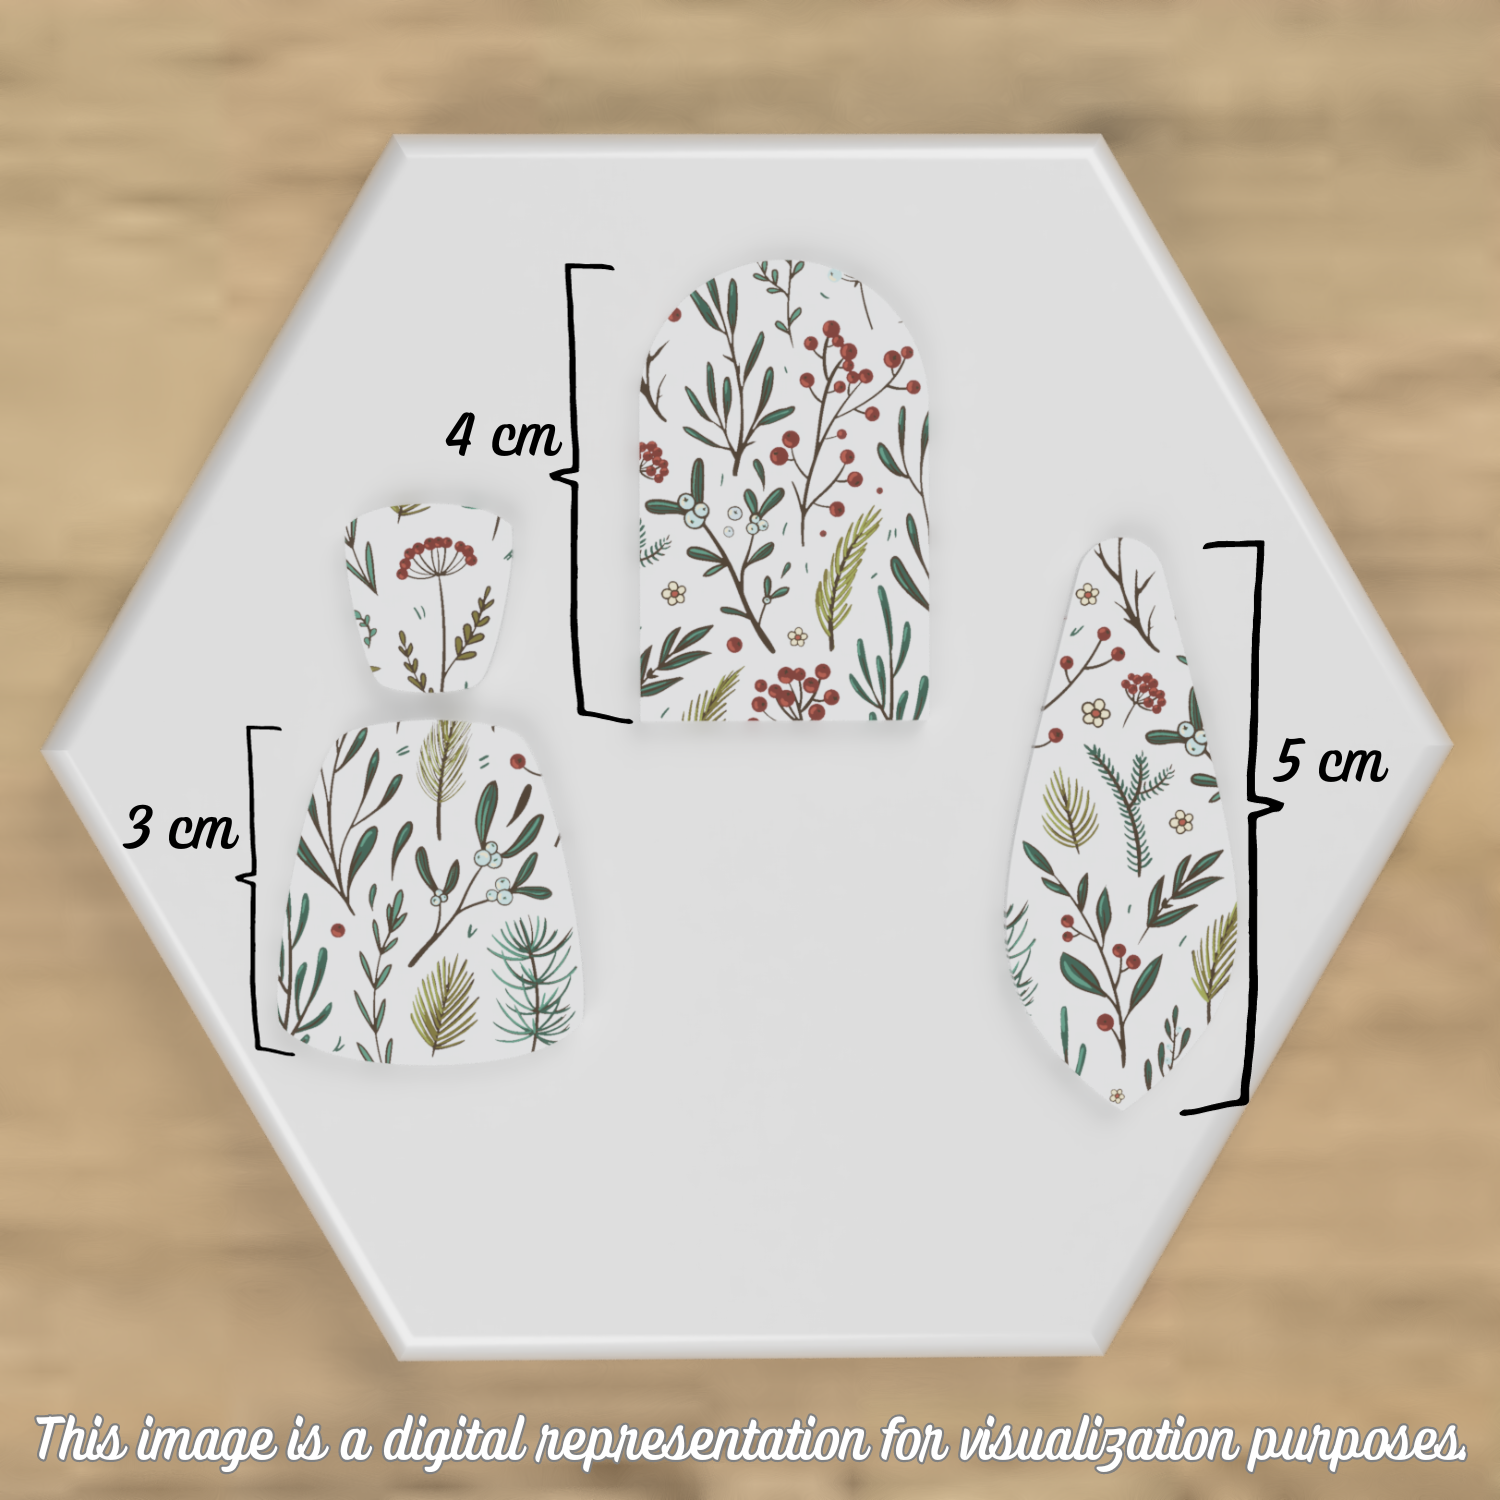 Festive floral and botanical design on polymer clay shapes using Yuletide Pine and Berries Transfer Sheet.